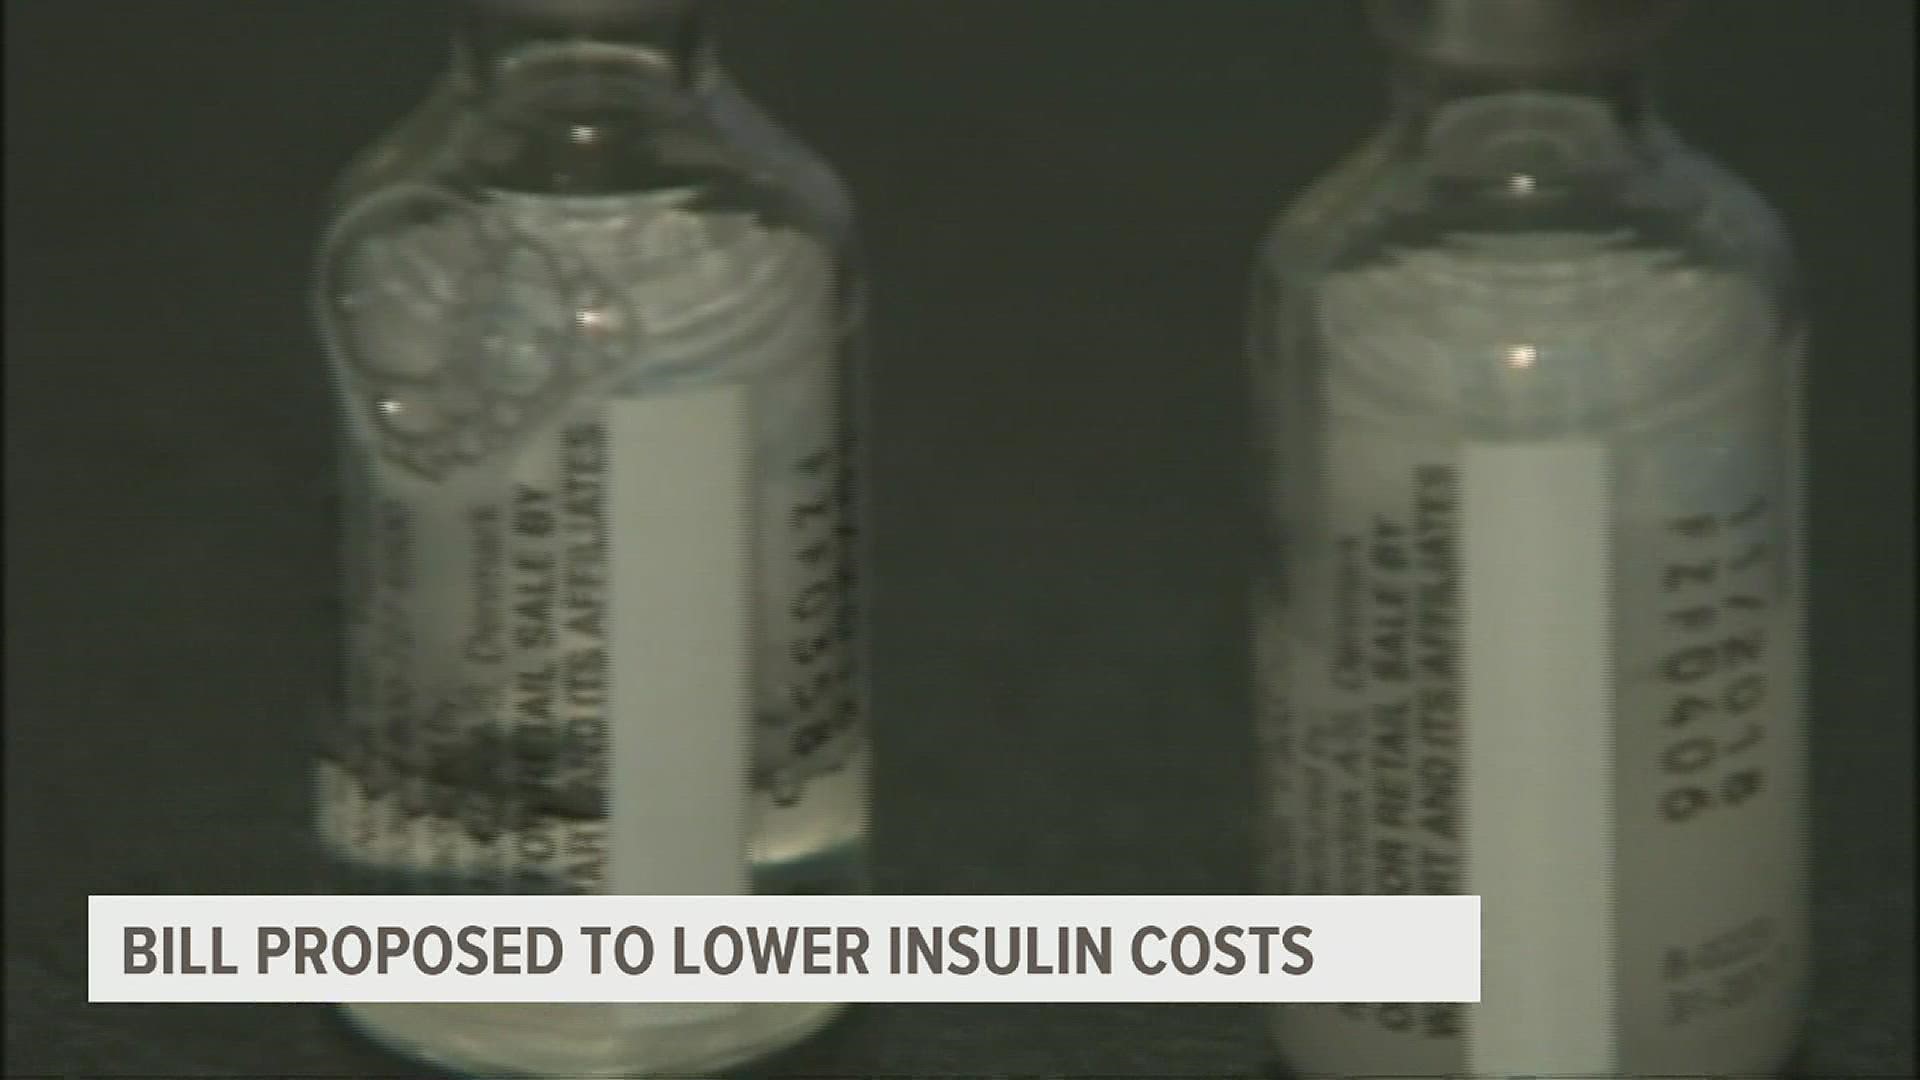 A newly proposed bill would limit the cost of insulin to $30 a month per patient. State Sen. and co-sponsor Doug Mastriano says current prices are out of control.